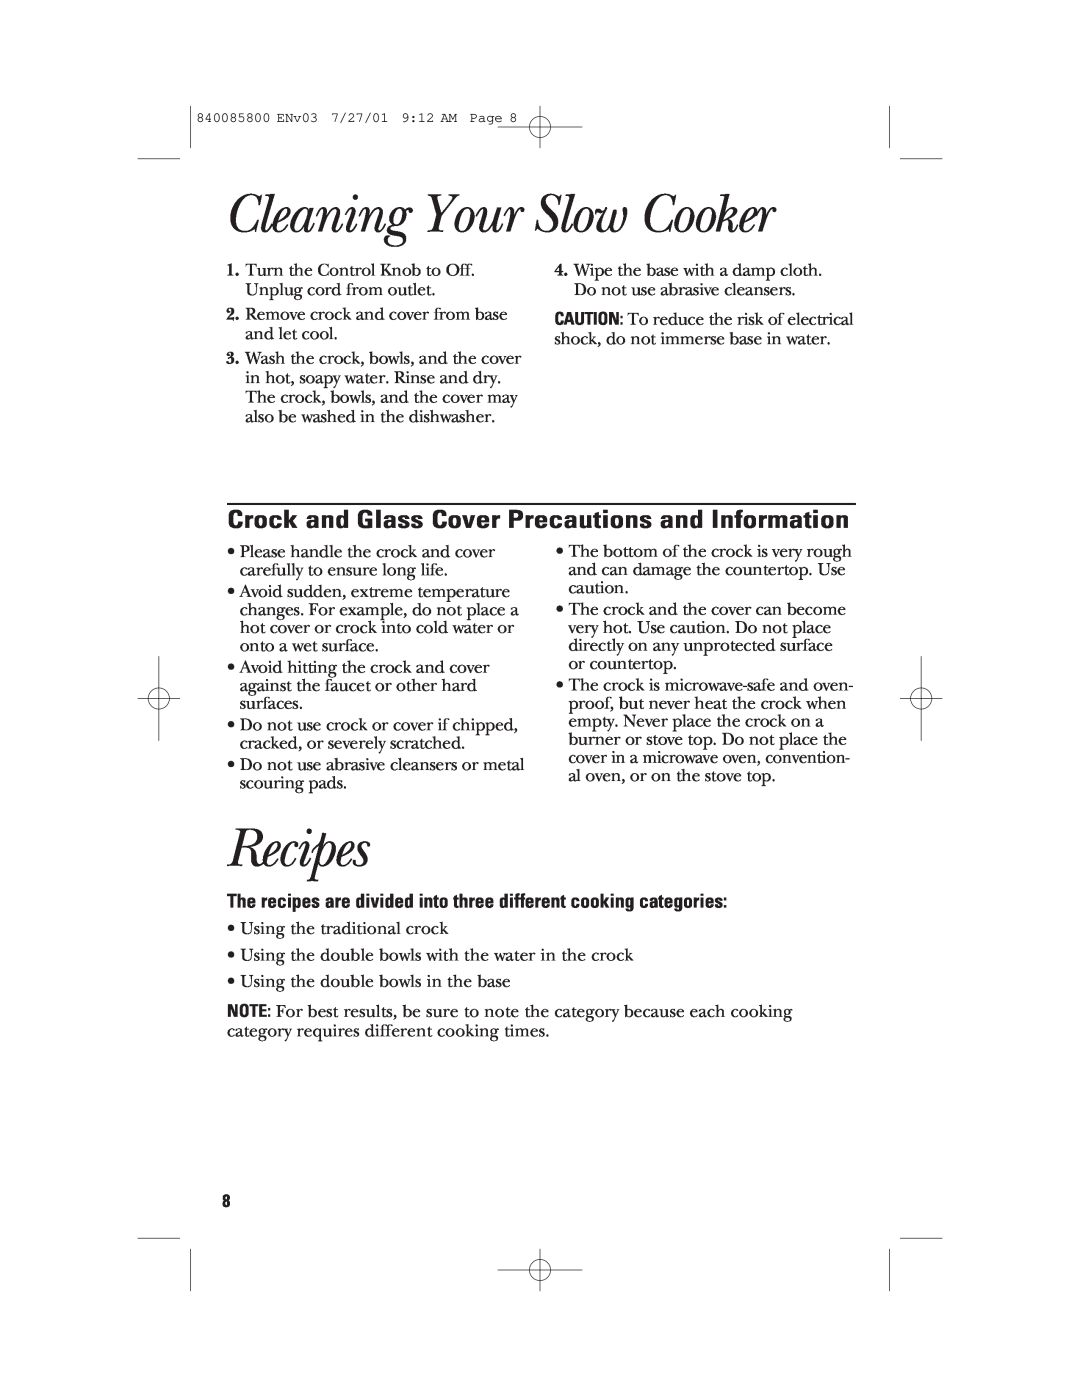 GE 106851, 840085800 manual Cleaning Your Slow Cooker, Recipes, Crock and Glass Cover Precautions and Information 